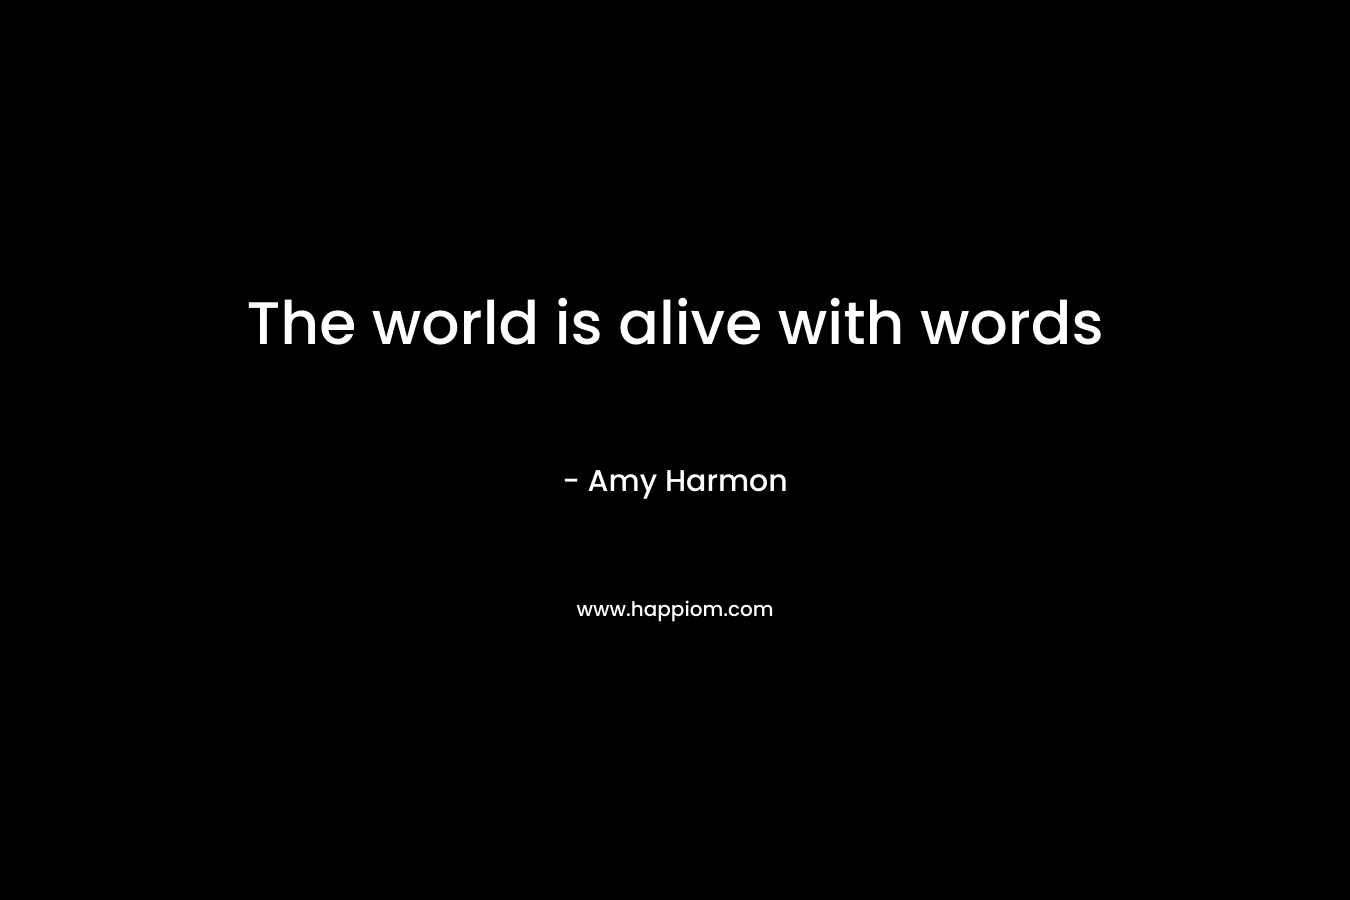 The world is alive with words